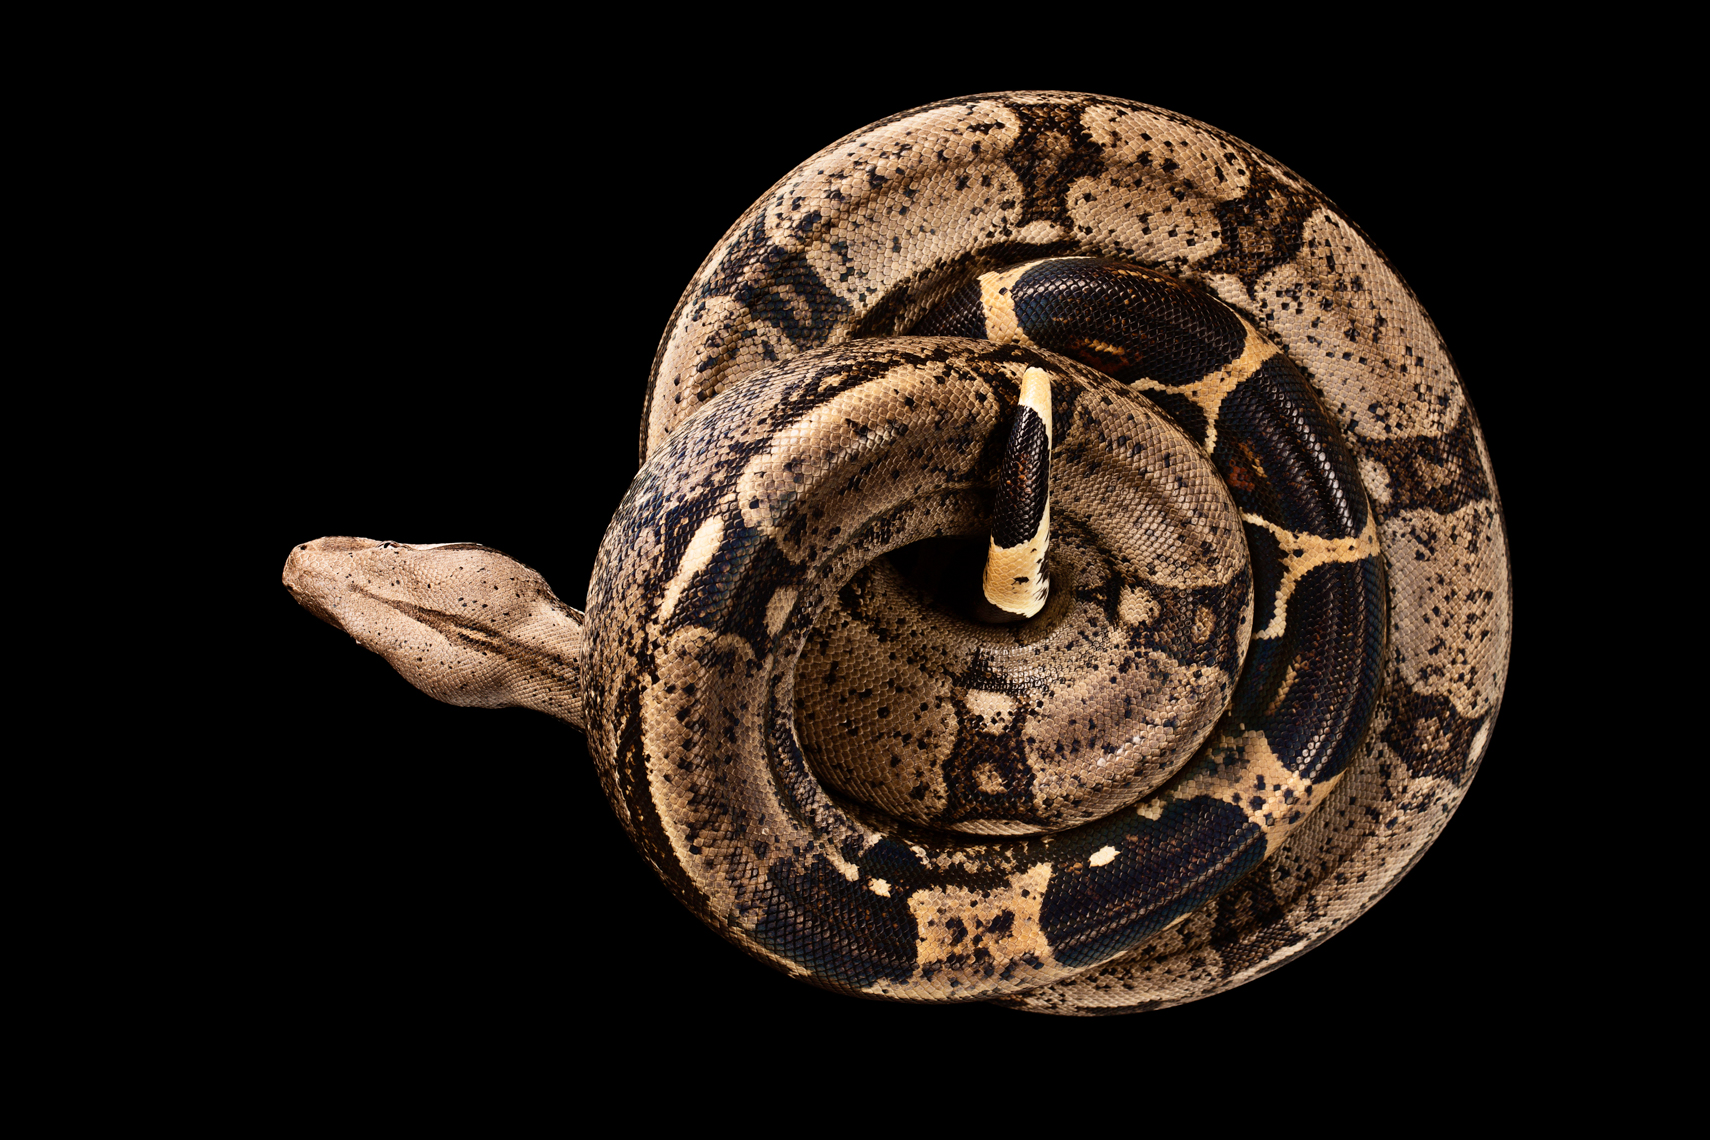 Columbian Red-tailed Boa